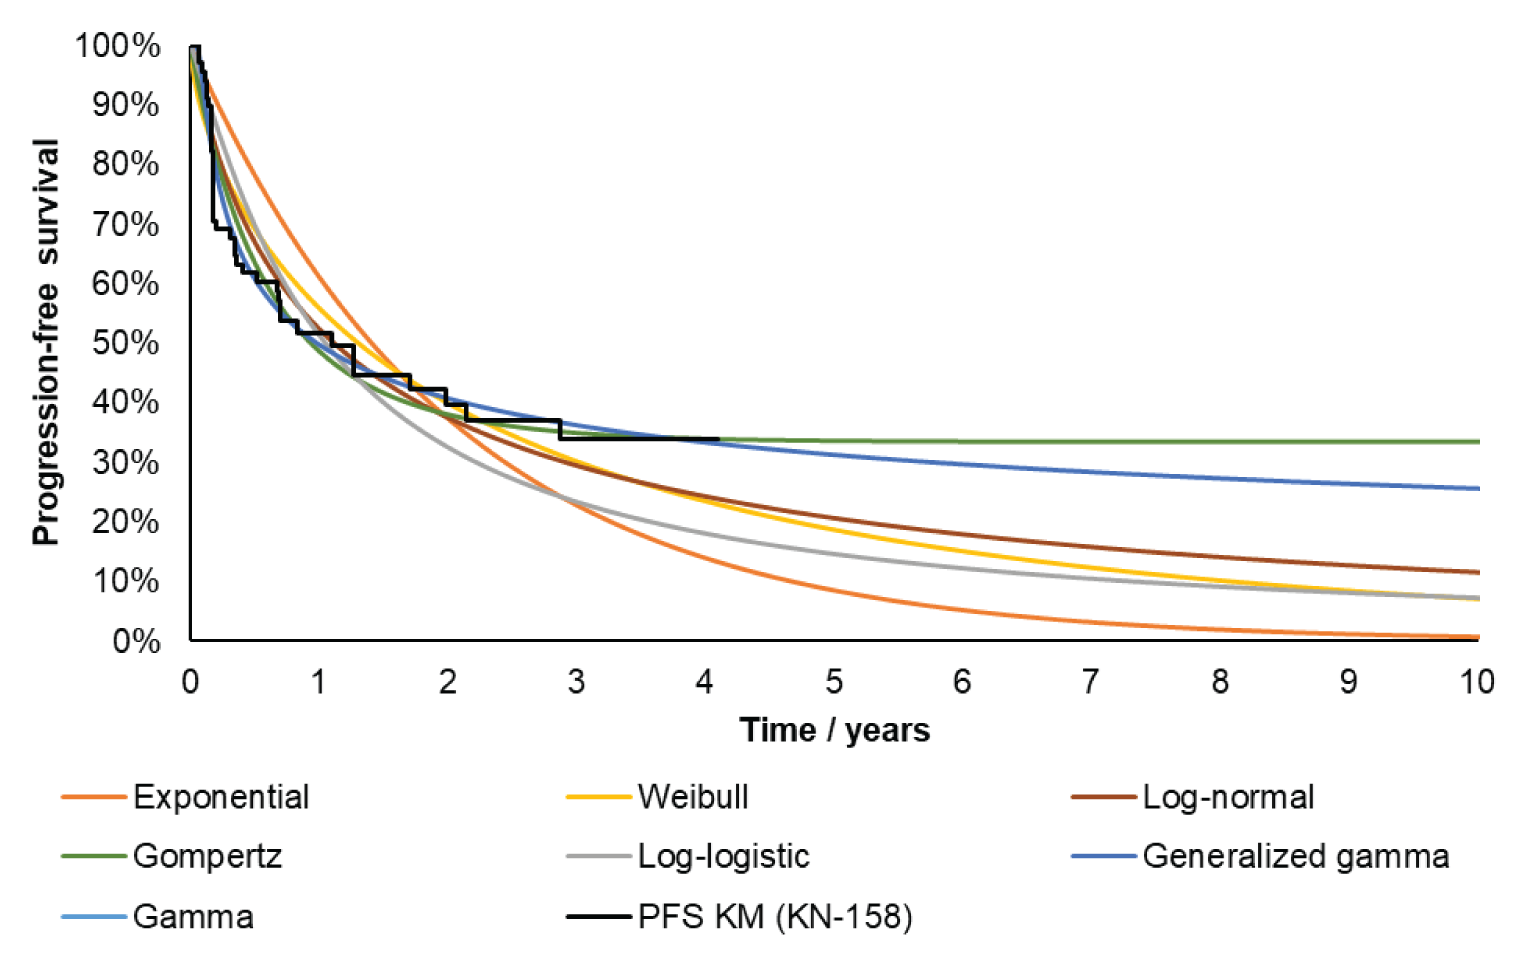 A Kaplan-Meier survival curve with the Y-axis labelled “progression-free survival” ranging from 0% to 100%, and the X-axis labelled “time in years” ranging from 0 to 10. The observed survival from the KN-158 study ends around year 4 (approximately 35% of participants surviving), with 7 parametric survival functions overlaid extending to year 10. All 7 parametric functions appear to overestimate survival until midway through year 1, with exponential being the highest and Gompertz being the lowest. After that point, the parametric functions separate notably, with Gompertz estimating the highest long-term survival (approximately 35% at year 10) and exponential estimating the lowest (approximately 0% at year 10).